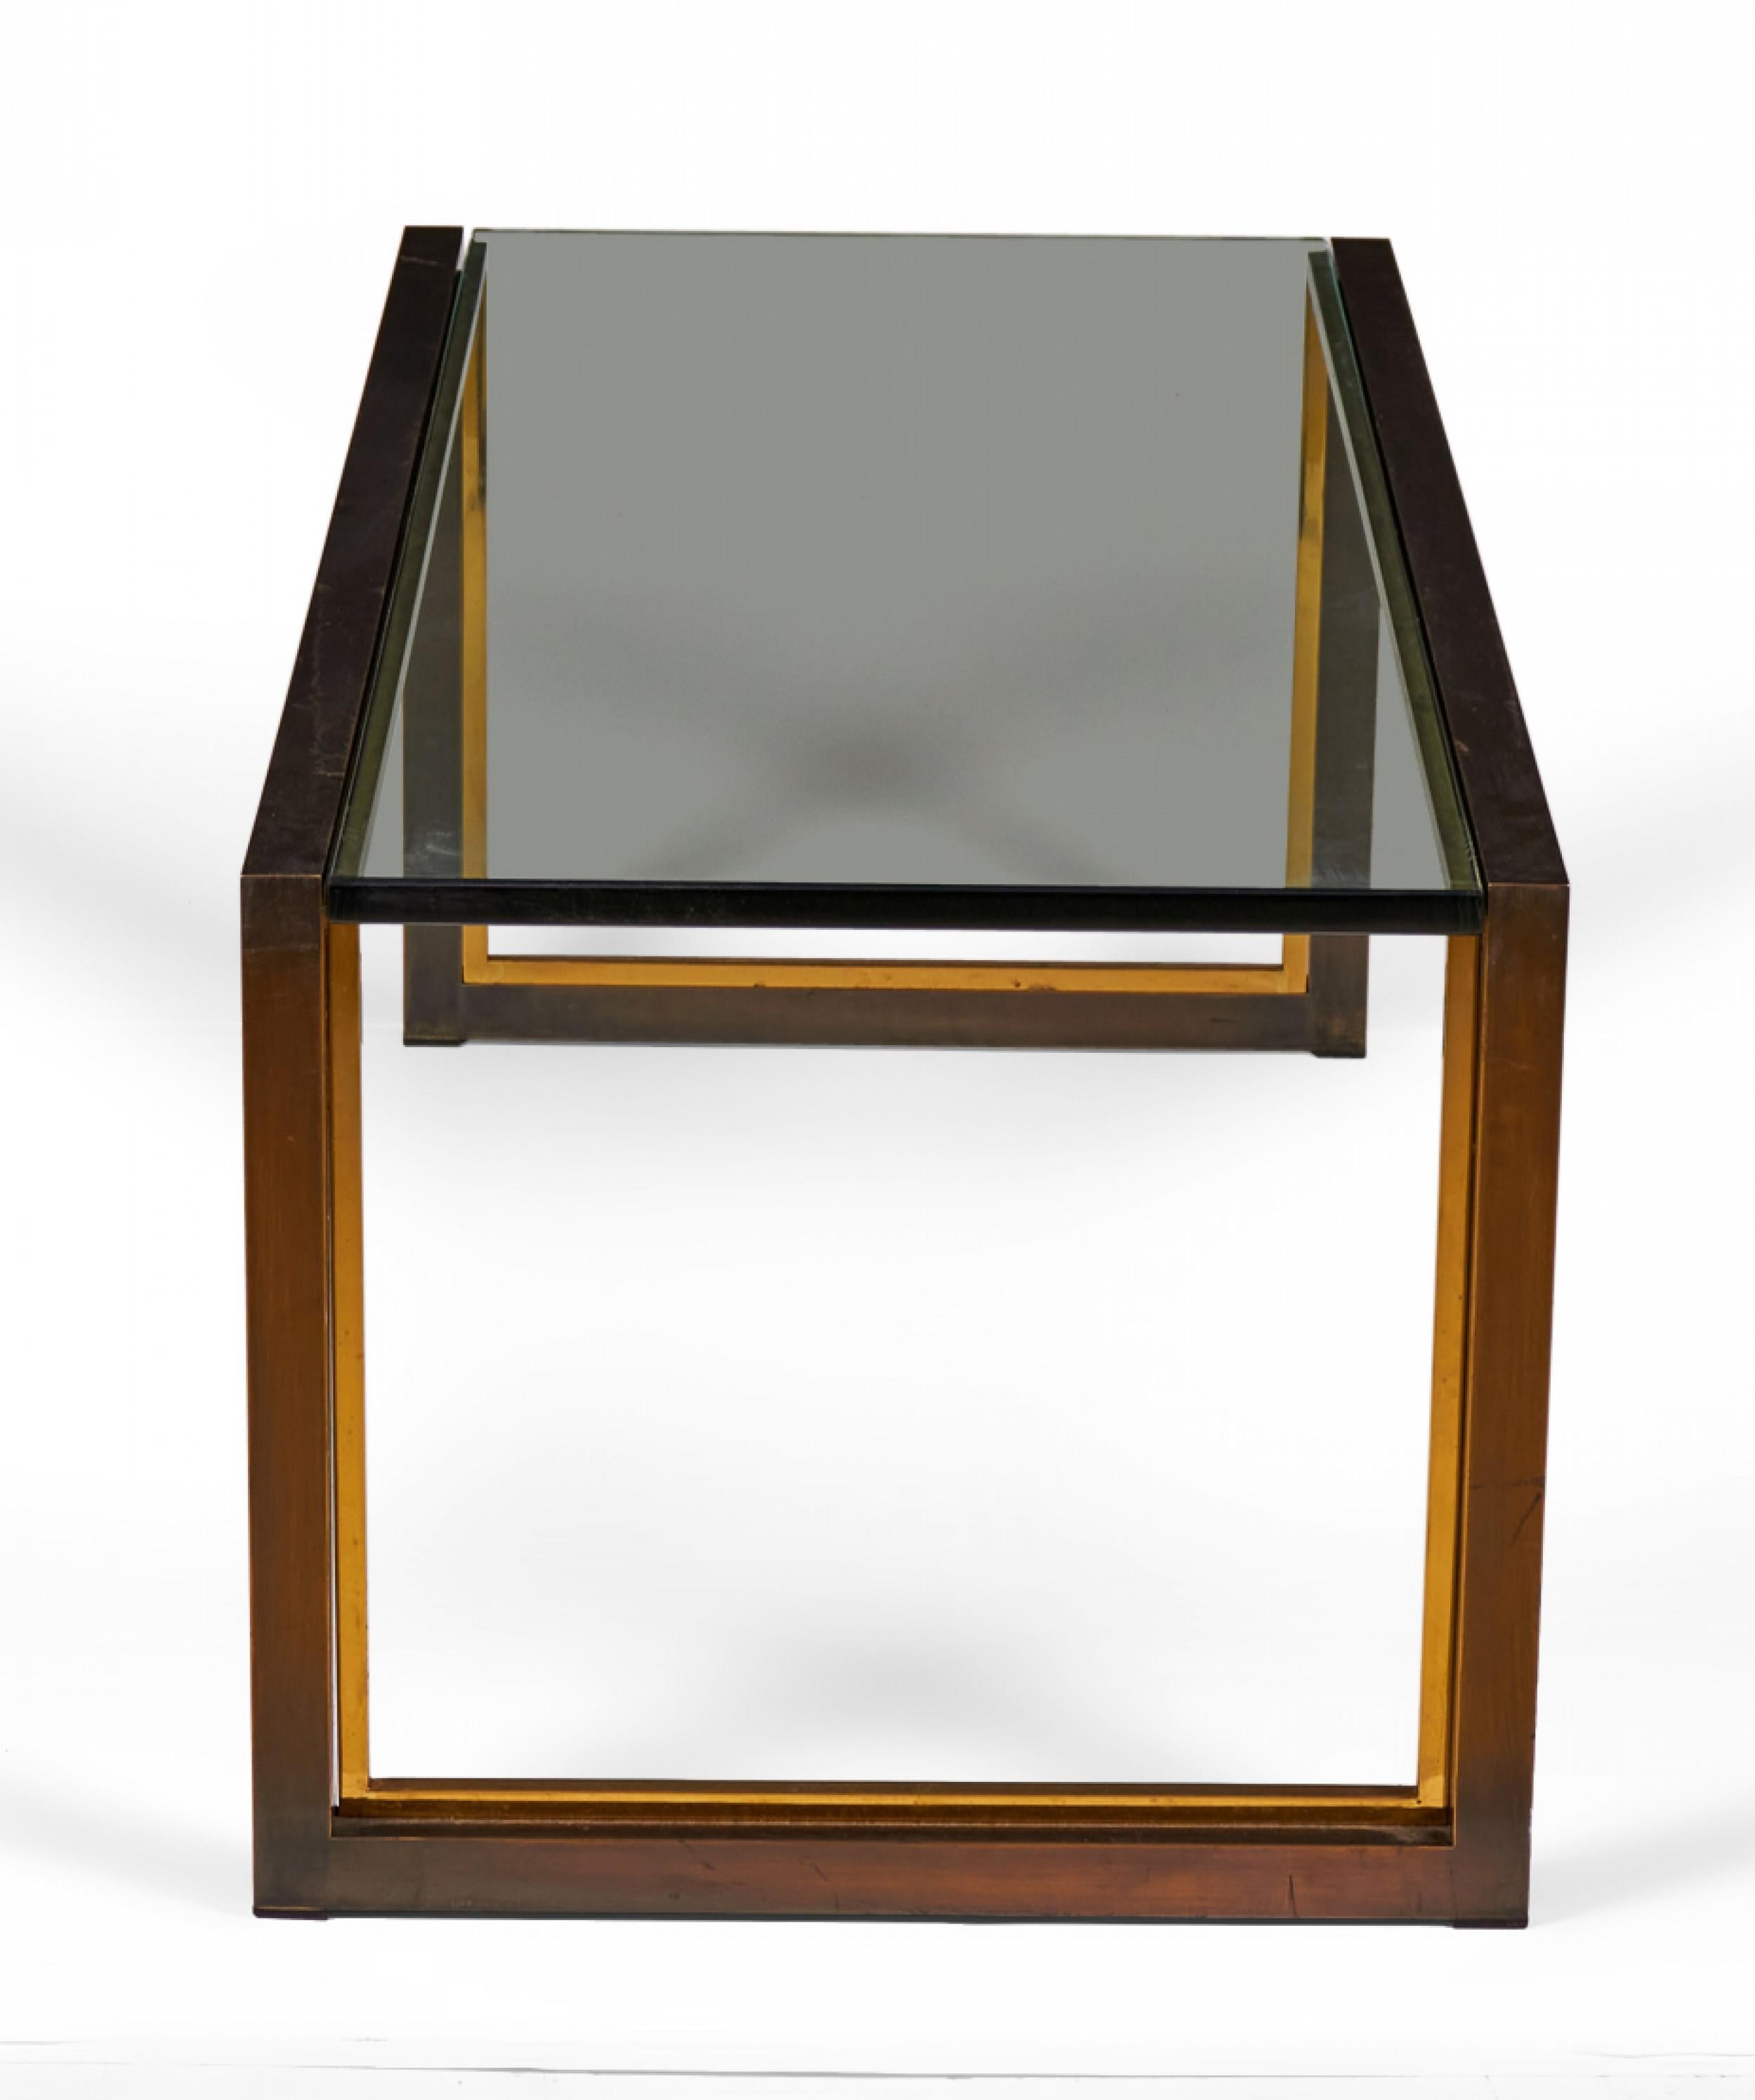 American Mid-Century rectangular coffee / cocktail table with a copper-colored metal bracket-shaped base with bronze trim and an inset smoked glass top.